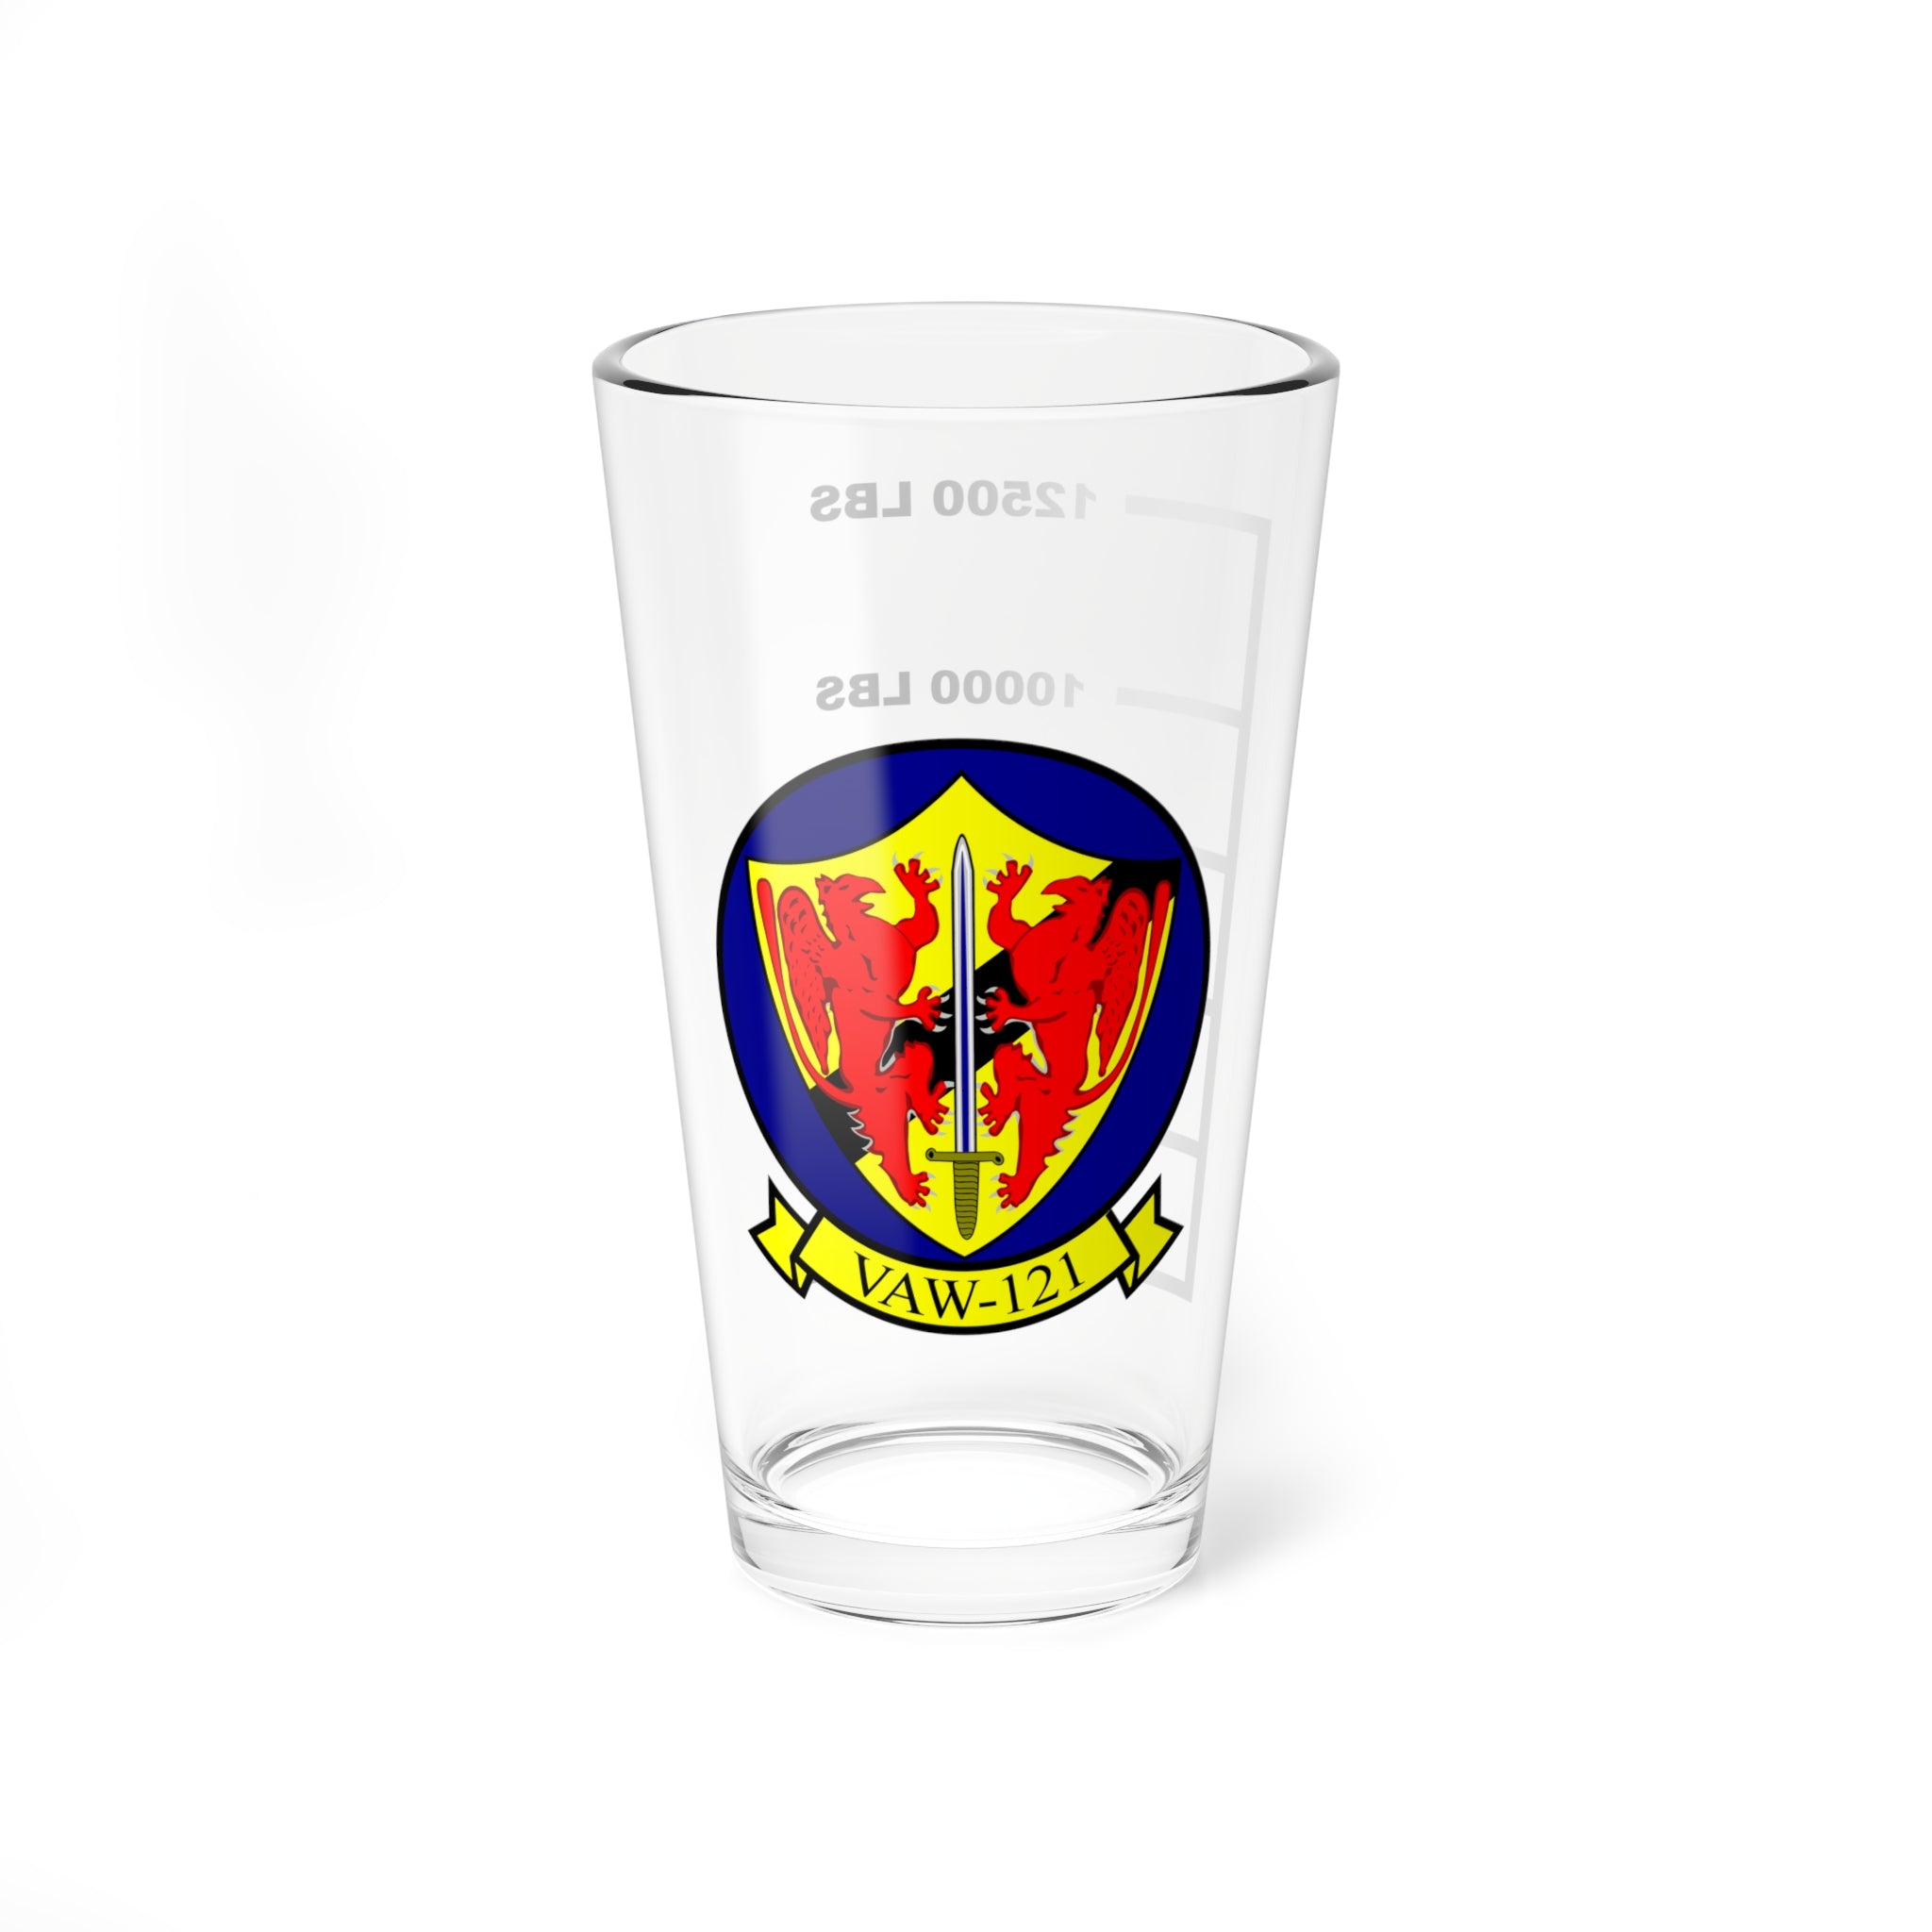 VAW-121 "Blue Tails"  Fuel Low Pint Glass, 16oz, Navy Airborne Command and Control Squadron Flying the E-2 Hawkeye